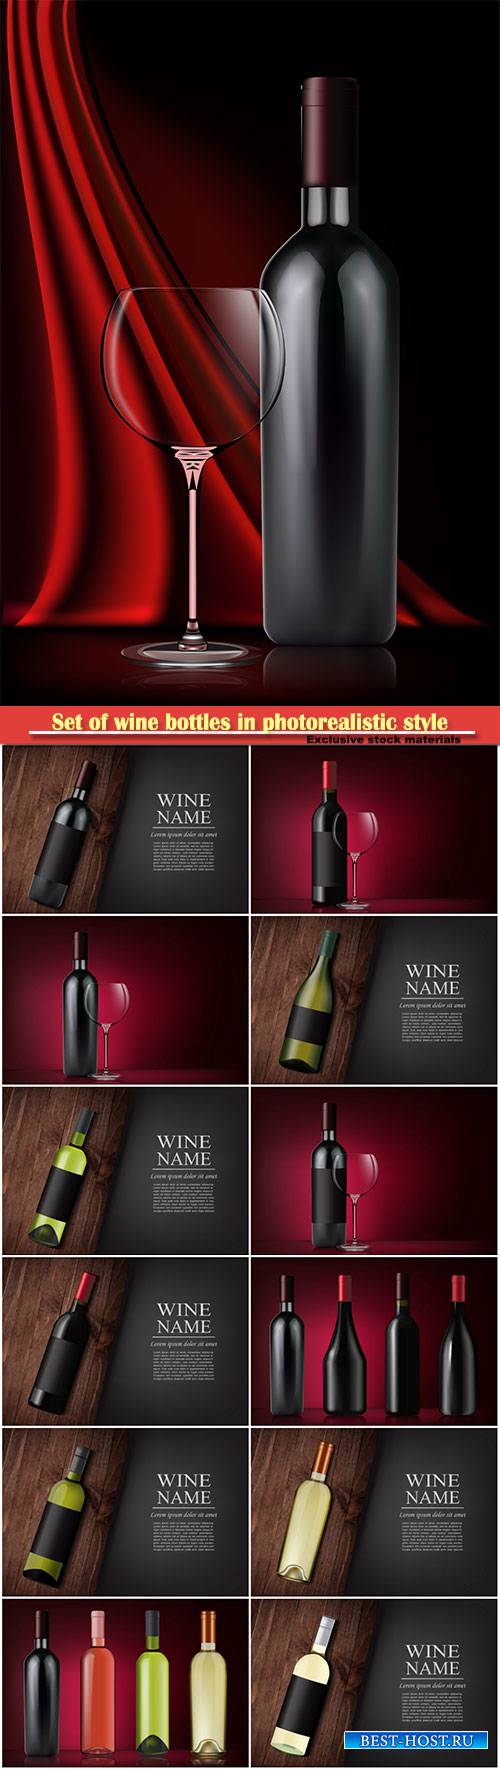 Set of wine bottles in photorealistic style, vector pink, white, red wines